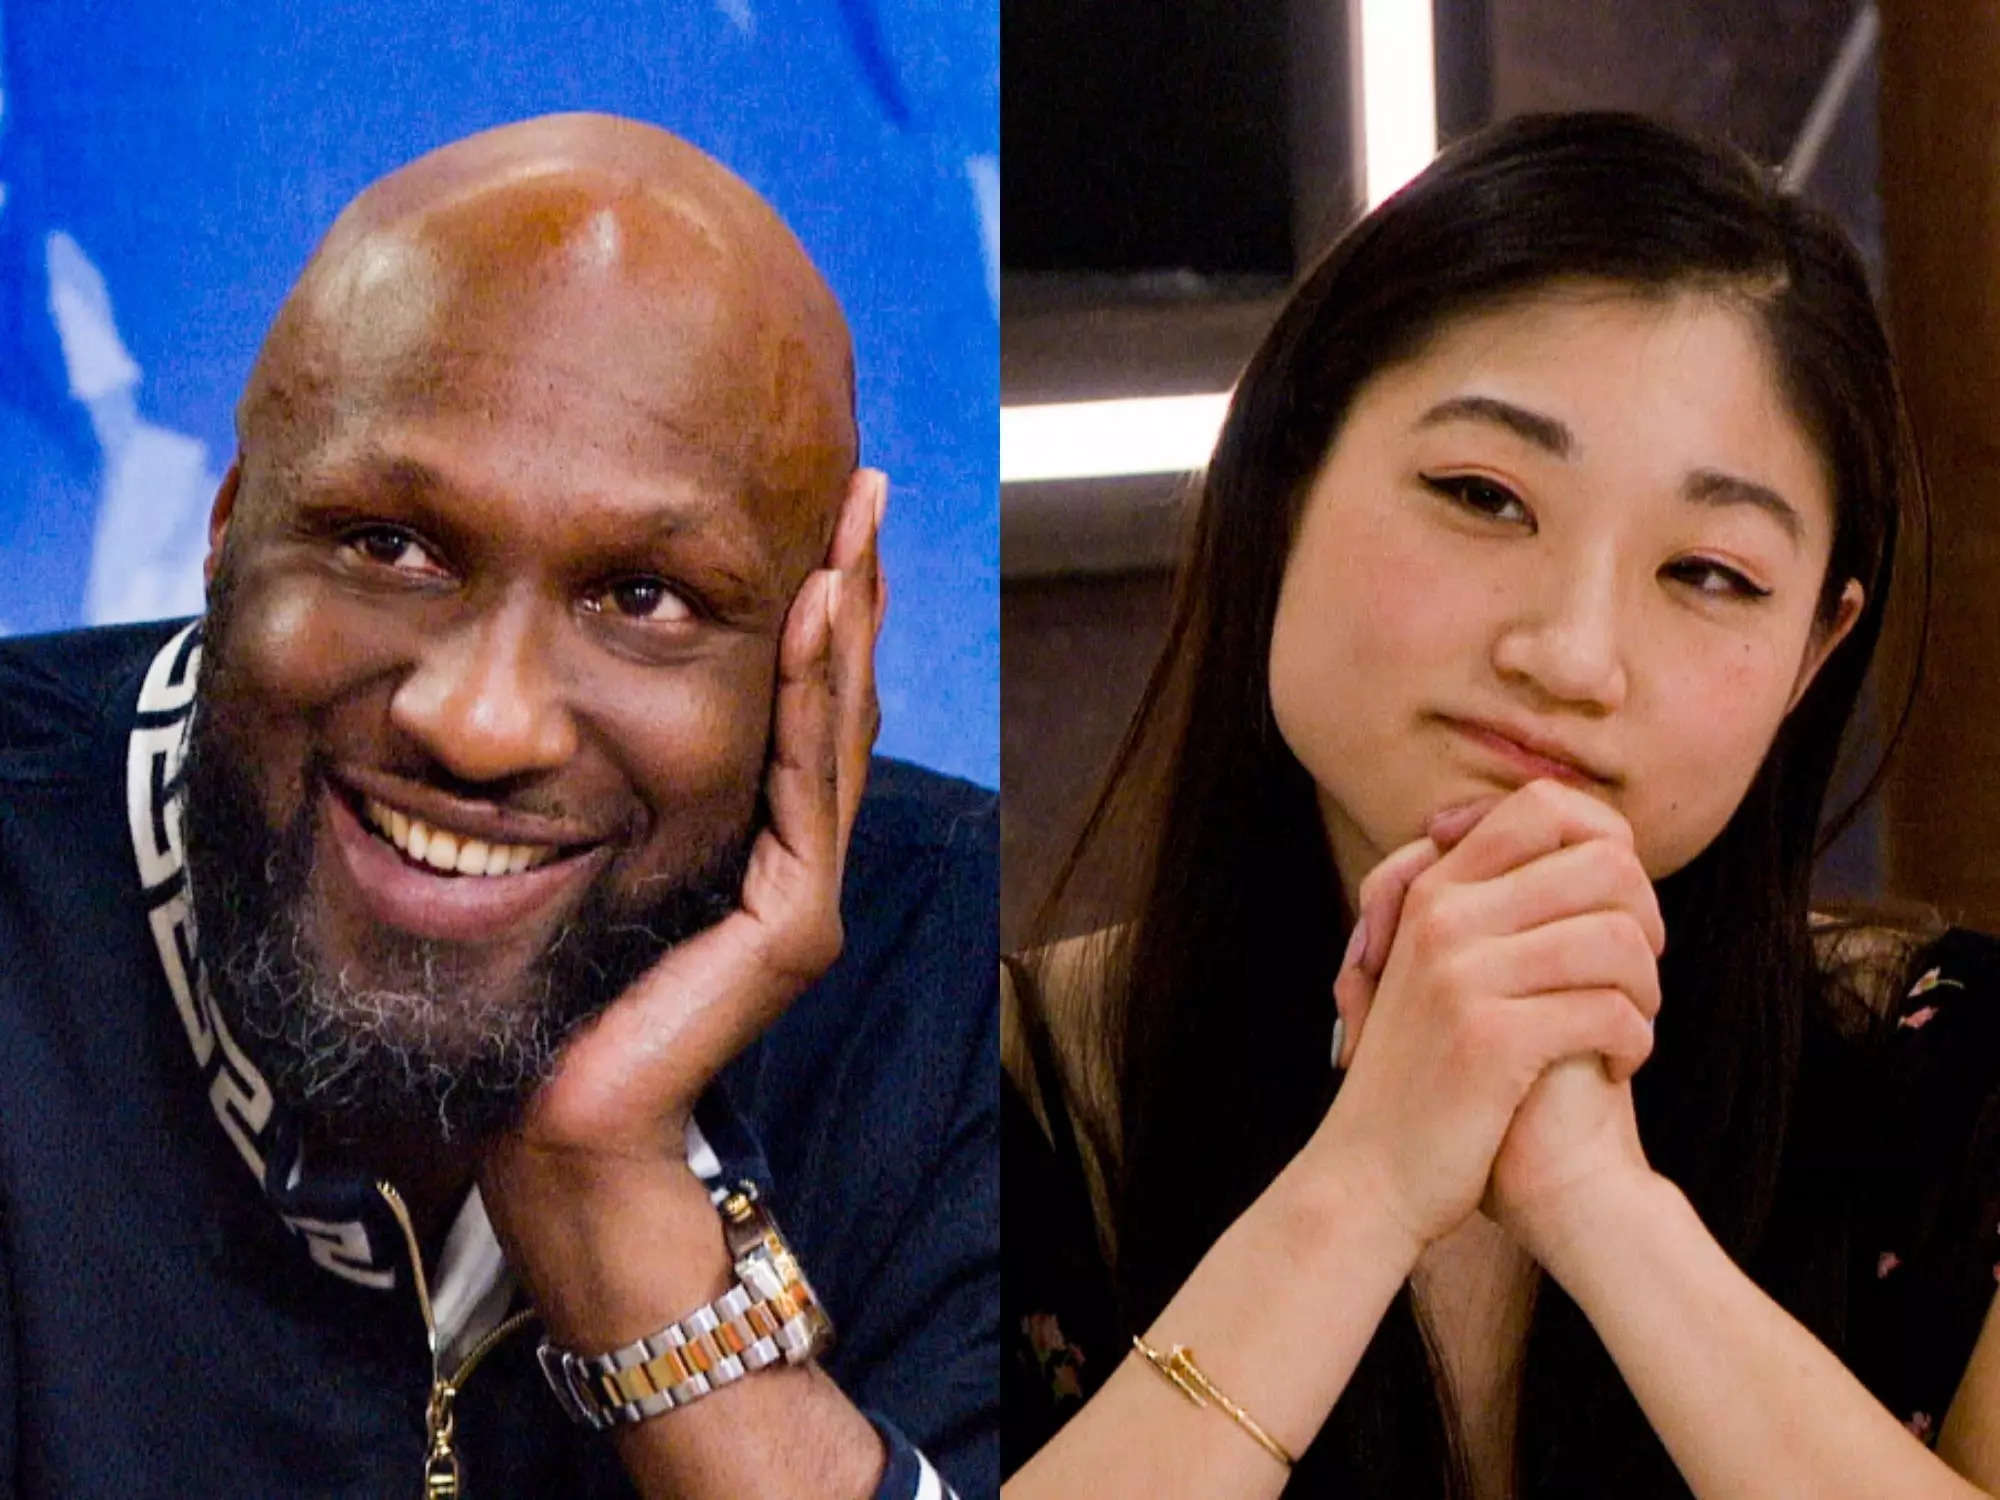 https://www.businessinsider.in/photo/89579365/lamar-odoms-bed-pooping-incident-on-celebrity-big-brother-gave-mirai-nagasu-a-little-giggle-says-the-olympian.jpg?imgsize=145854